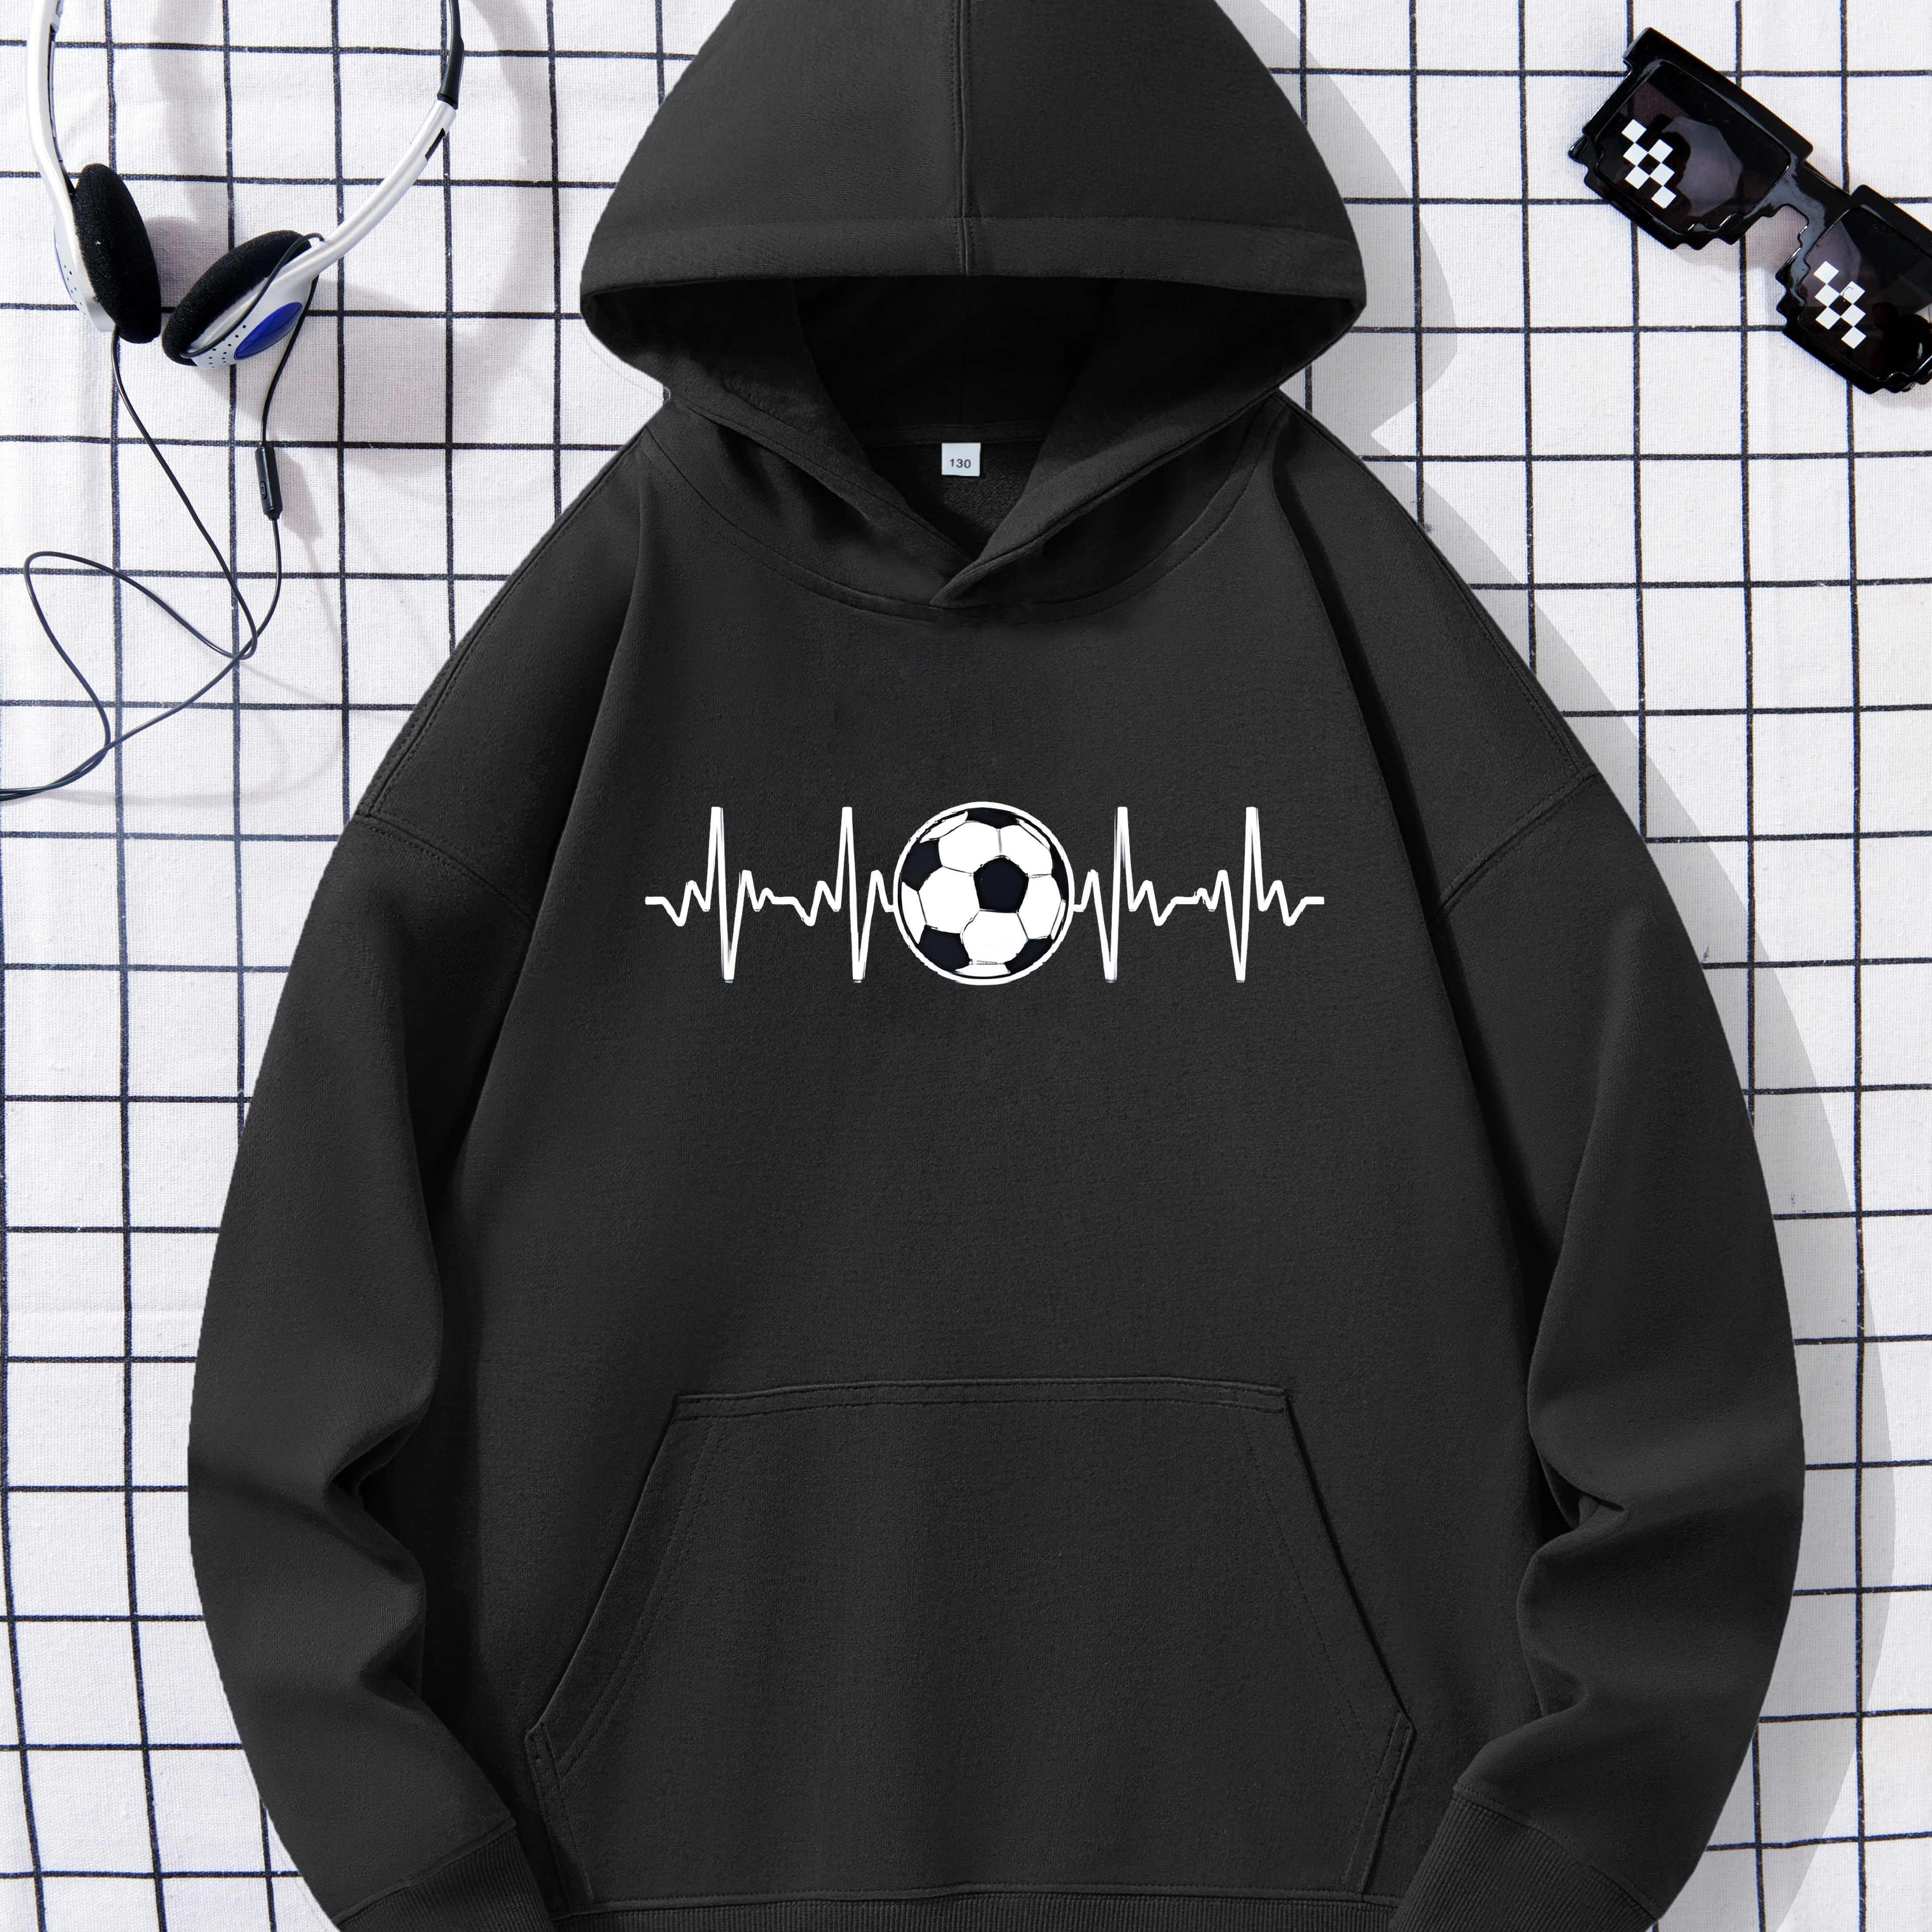 

Football And Heartbeat Print Boys Casual Pullover Long Sleeve Hoodies, Boys Hooded Top For Spring Fall Winter, Kids Hoodie Outdoor